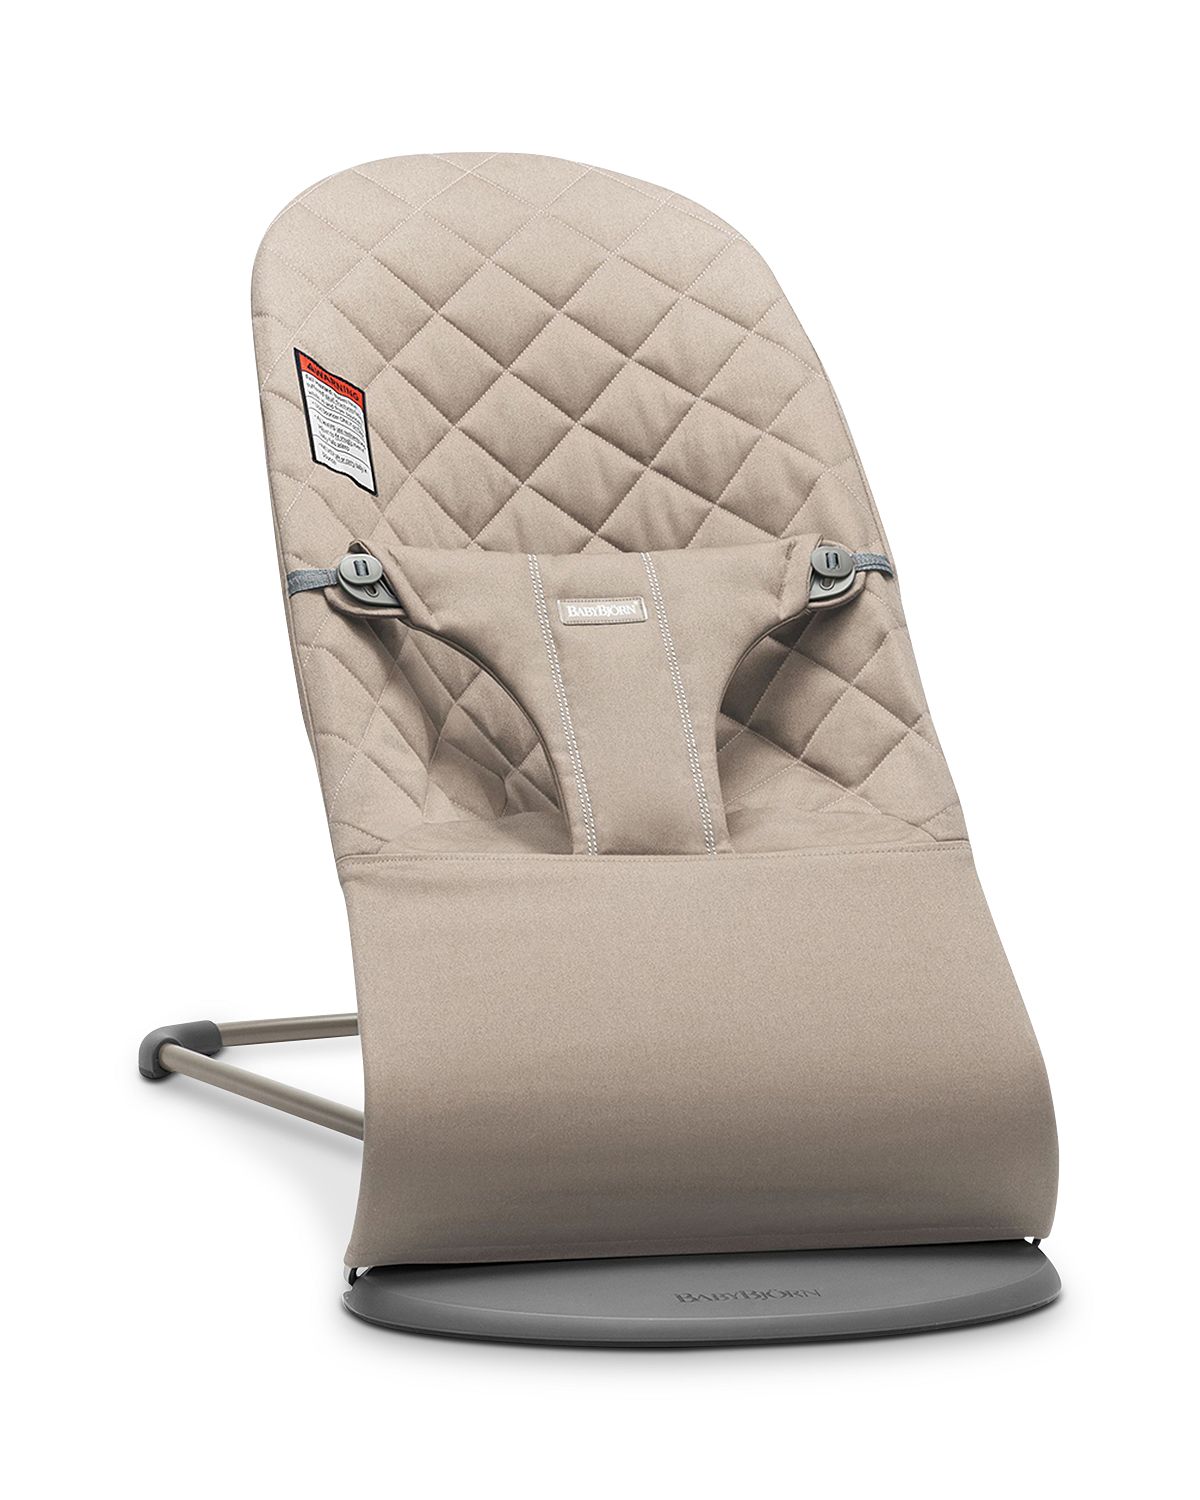 Photo 1 of Babybjorn Cotton Bouncer Bliss, Sand Grey